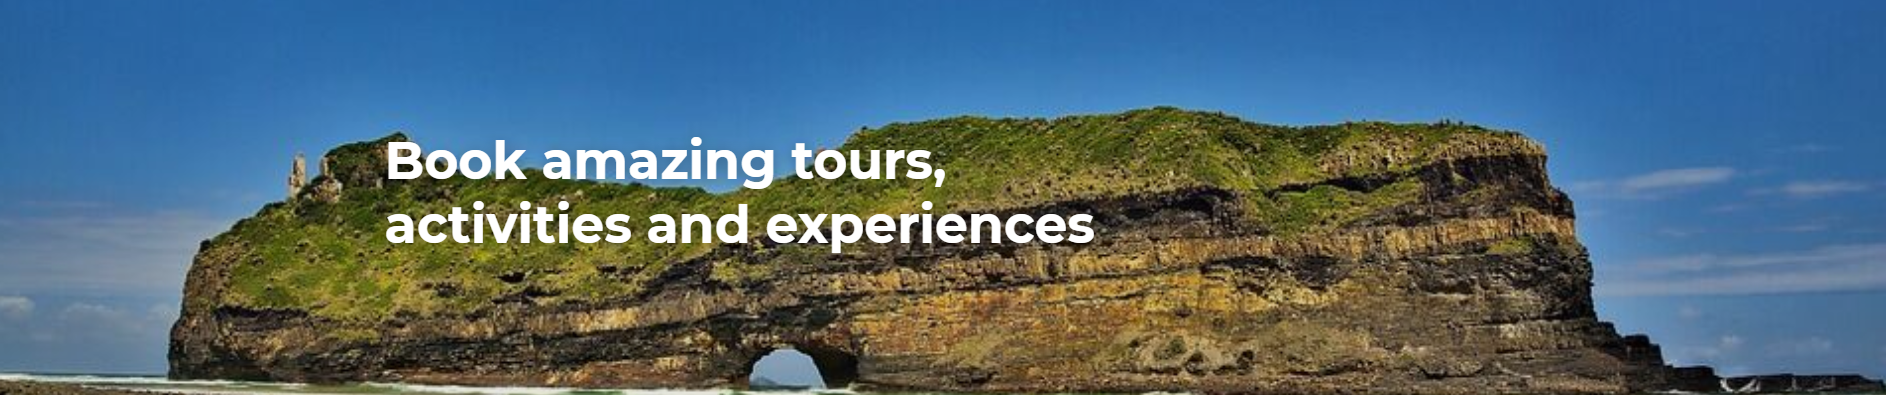 Book amazing tours and experiences in south africa things to do sightseeing staycation ideas south africa where to go in south africa